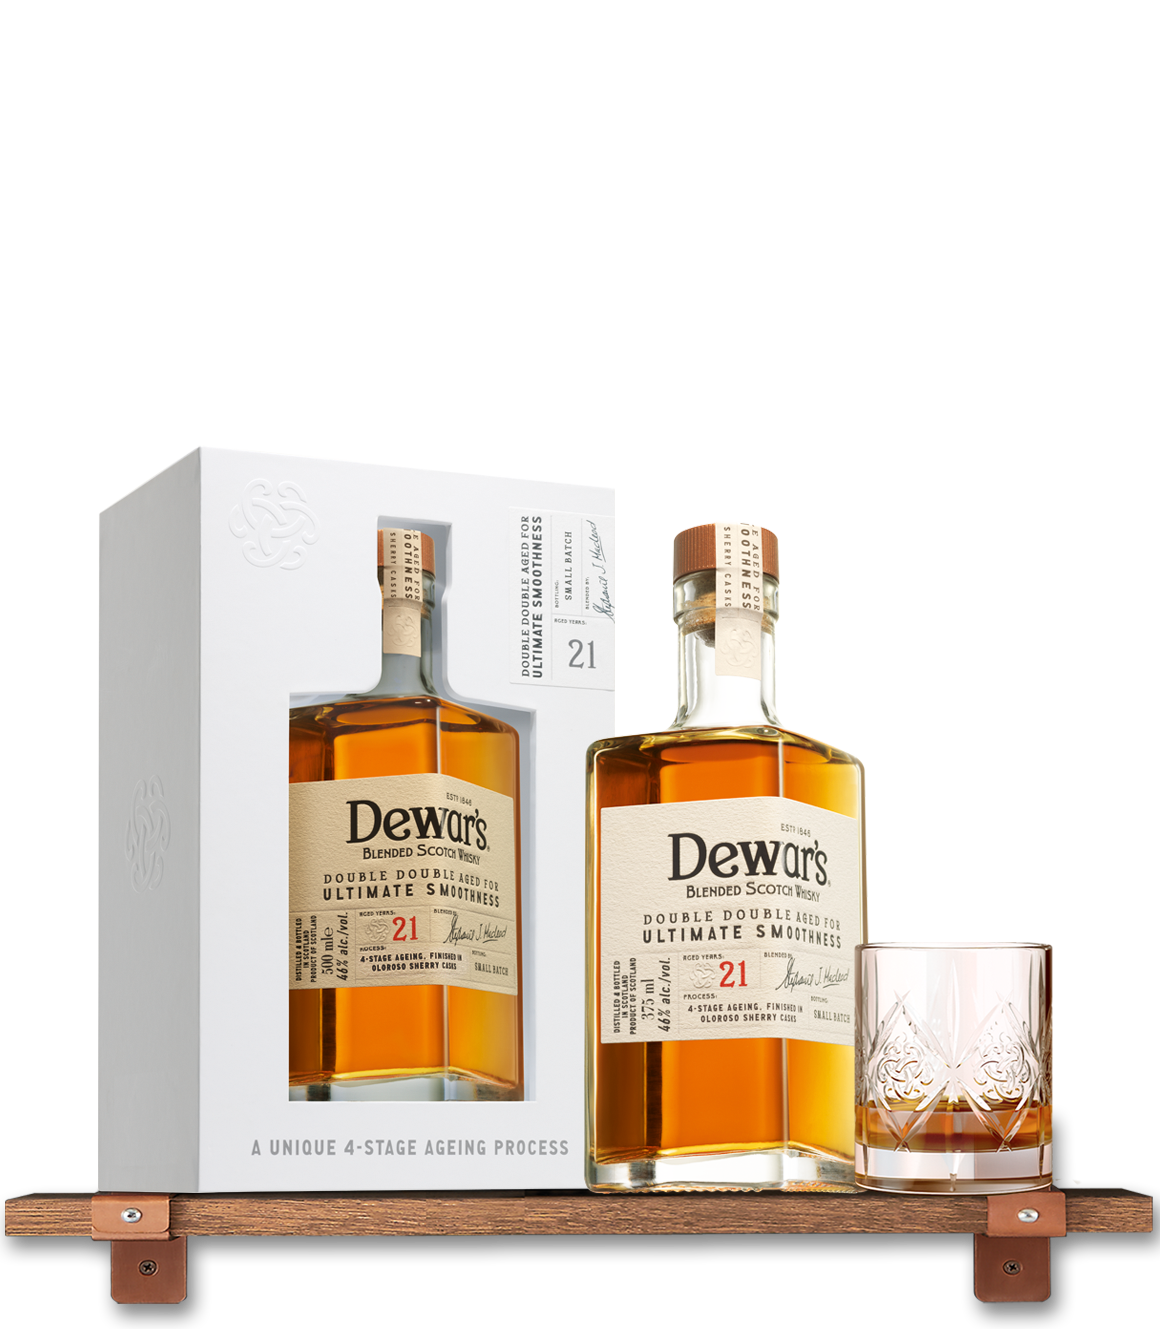 Dewar's Double Double Aged 21 Year Small Batch Blended Scotch